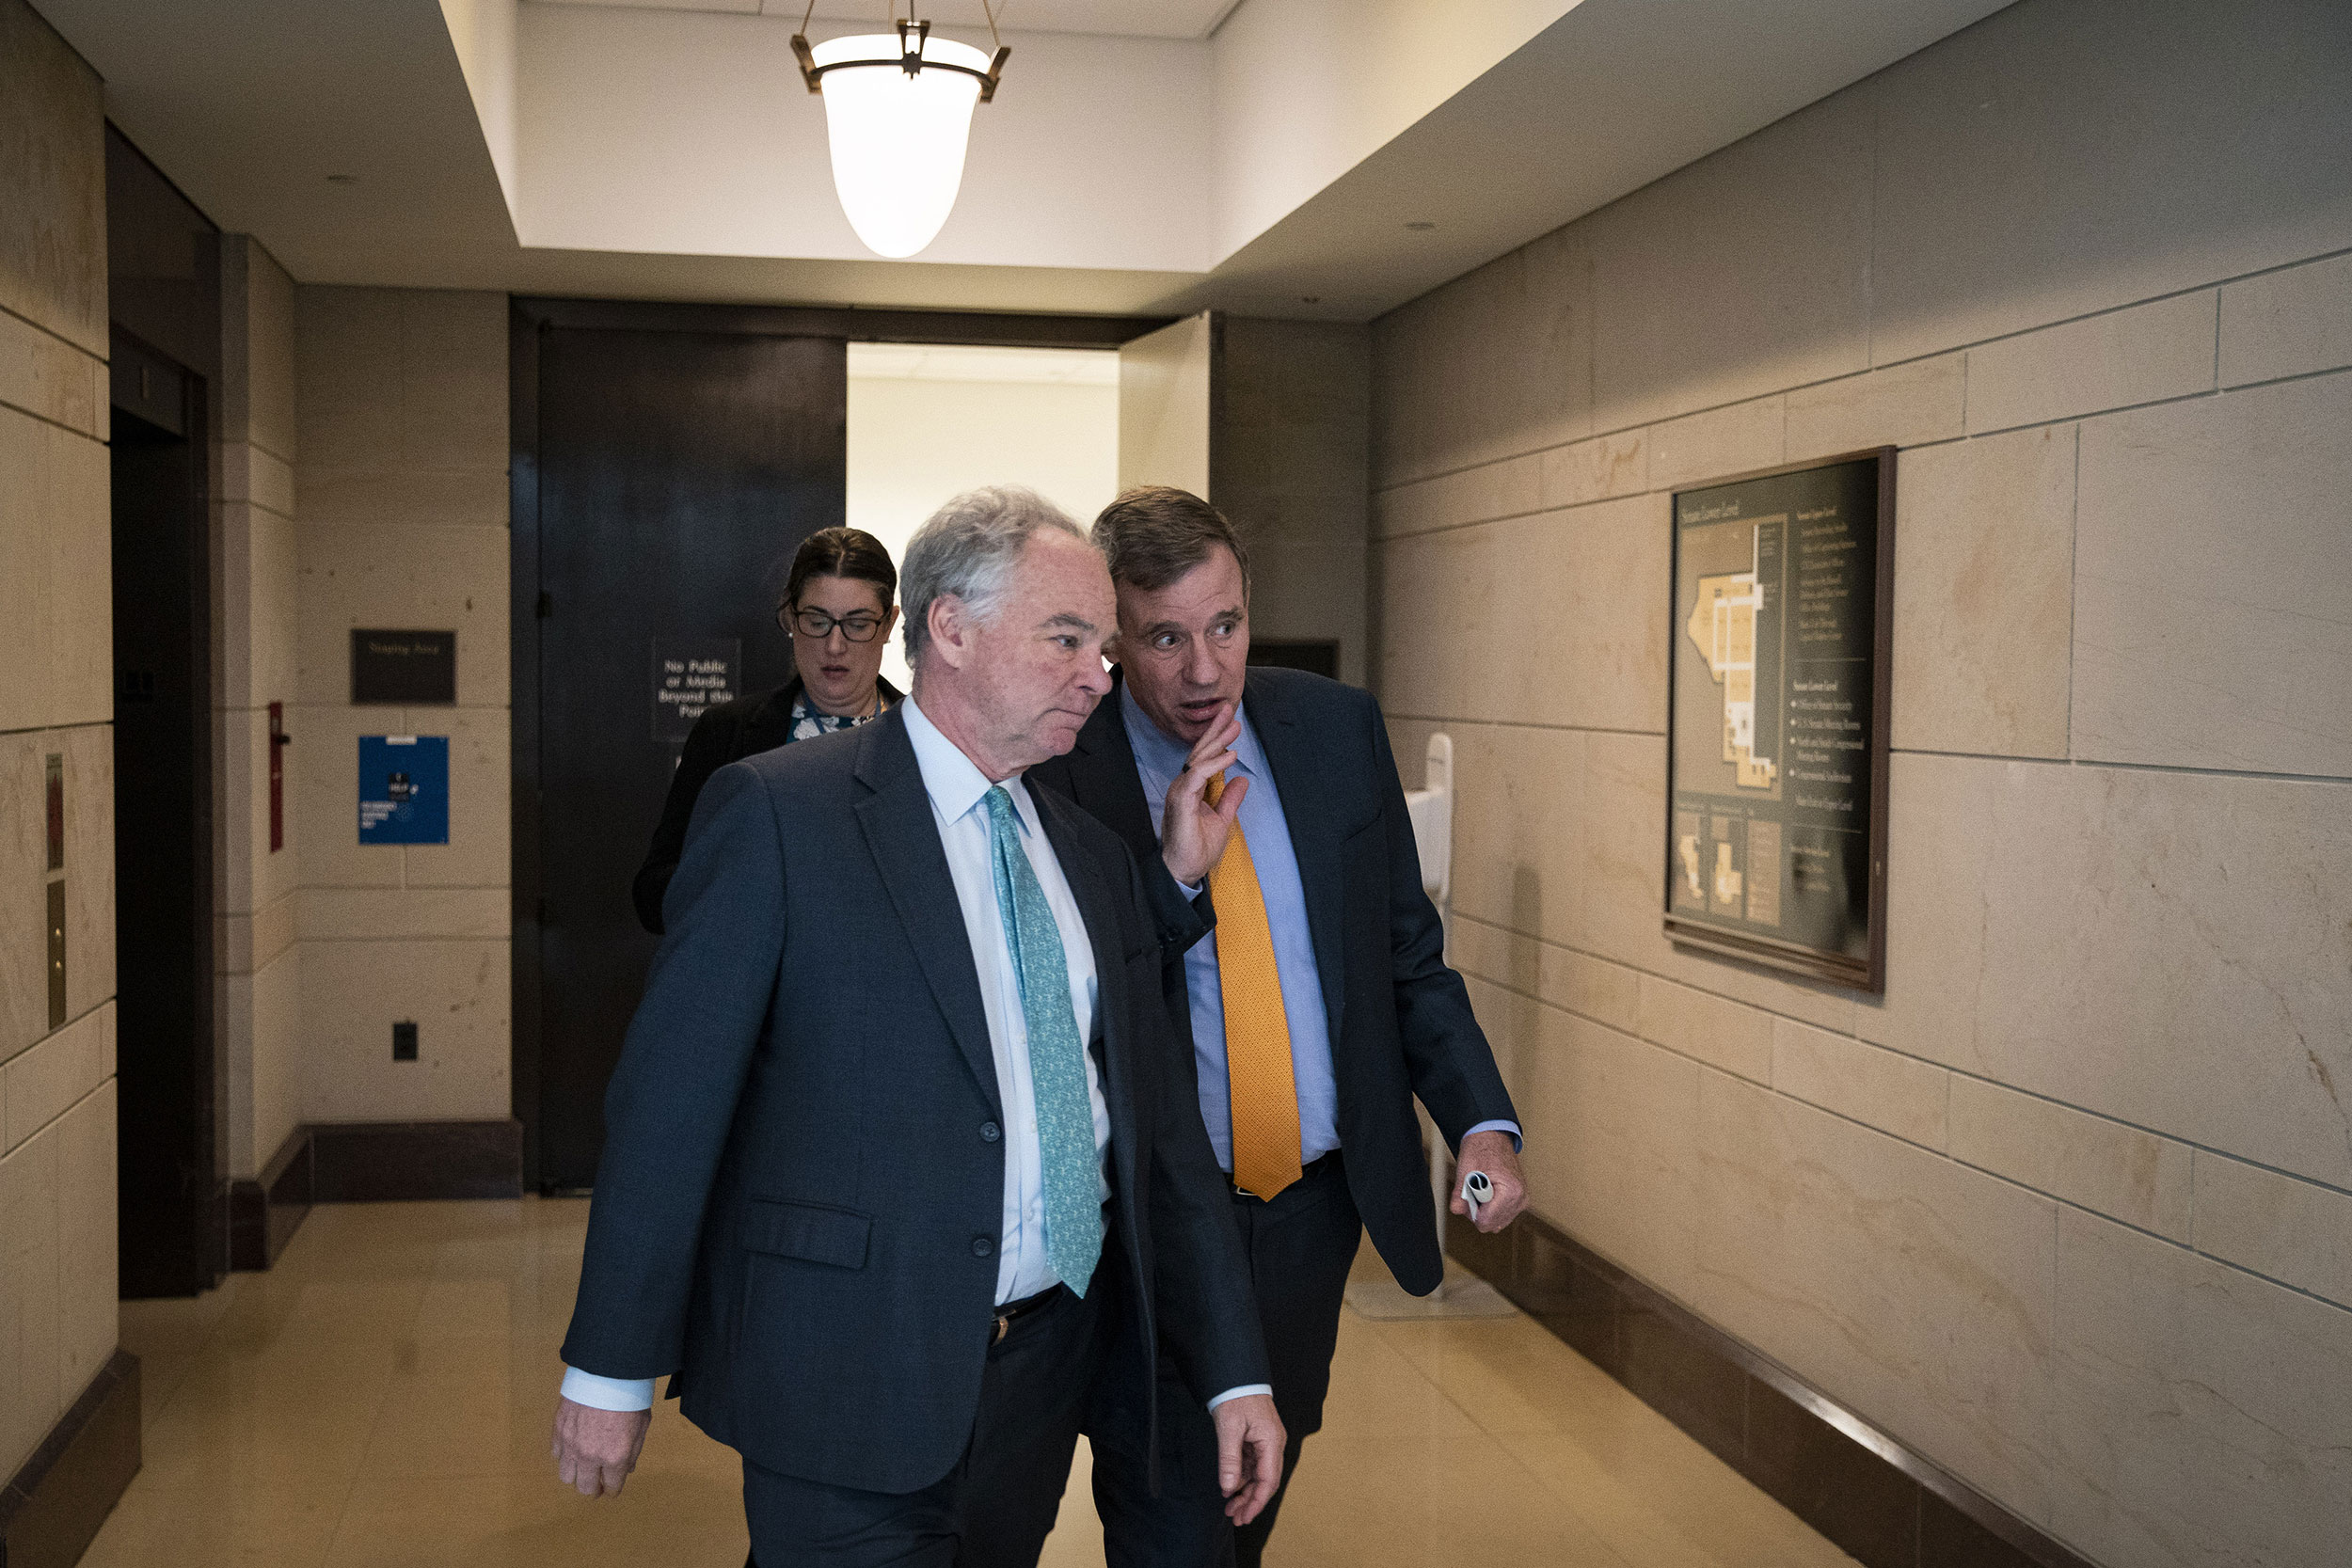 Sens. Tim Kaine, left, and Mark Warner talk while departing from an intelligence briefing on the Chinese spy balloon on February 9.